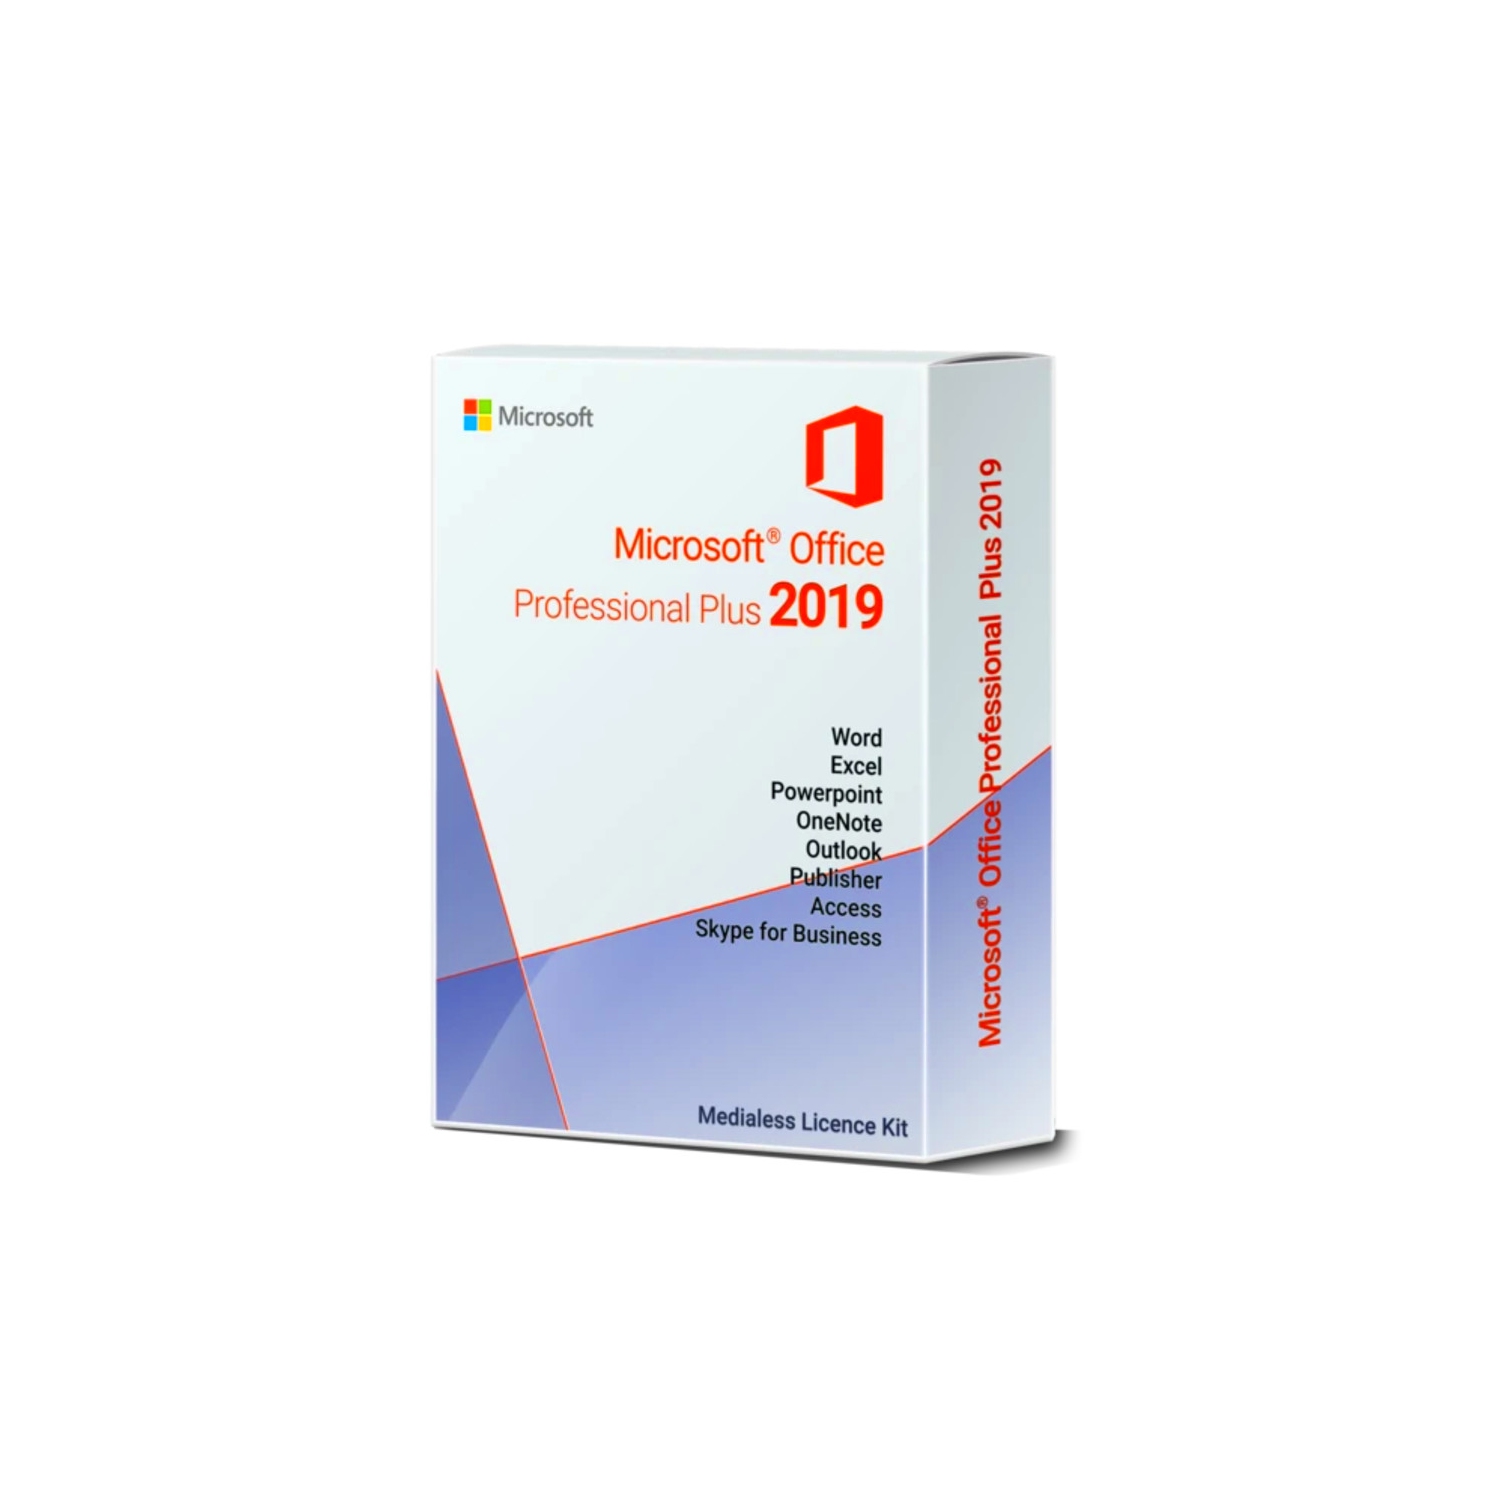 MICROSOFT OFFICE 2019 PROFESSIONAL PLUS LICENSE AND DOWNLOAD